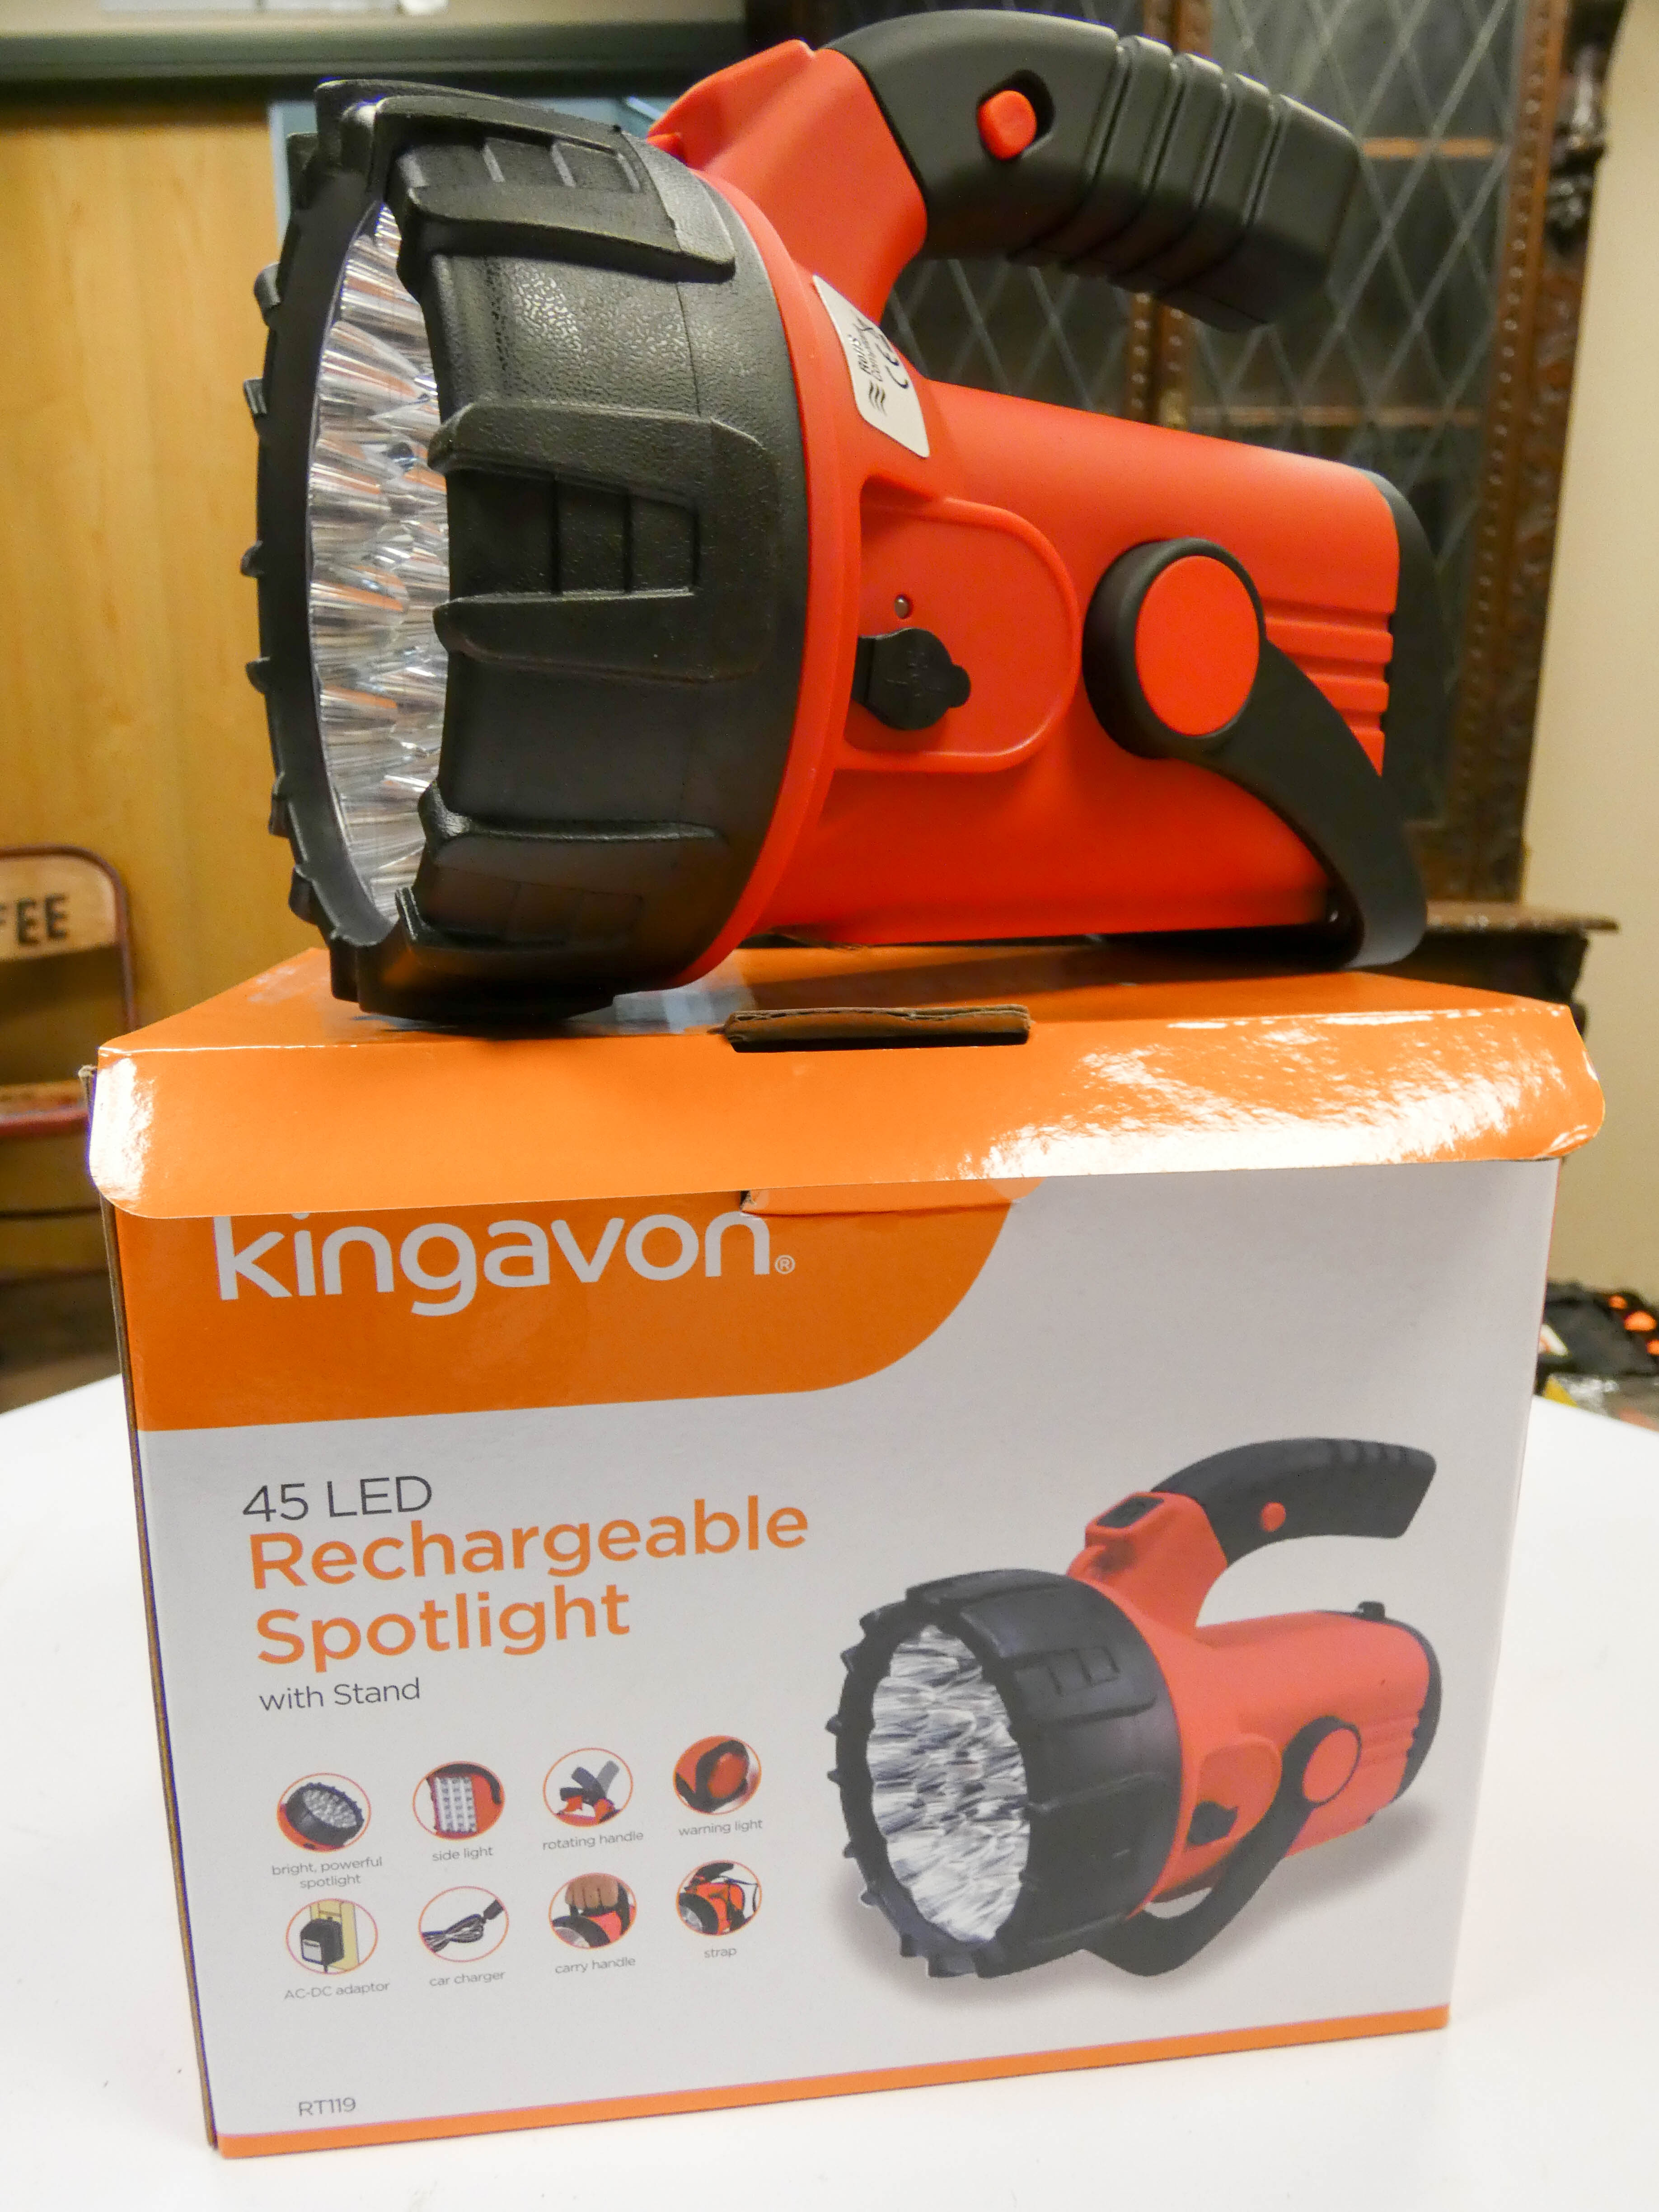 A new 45 LED four function rechargeable spotlight